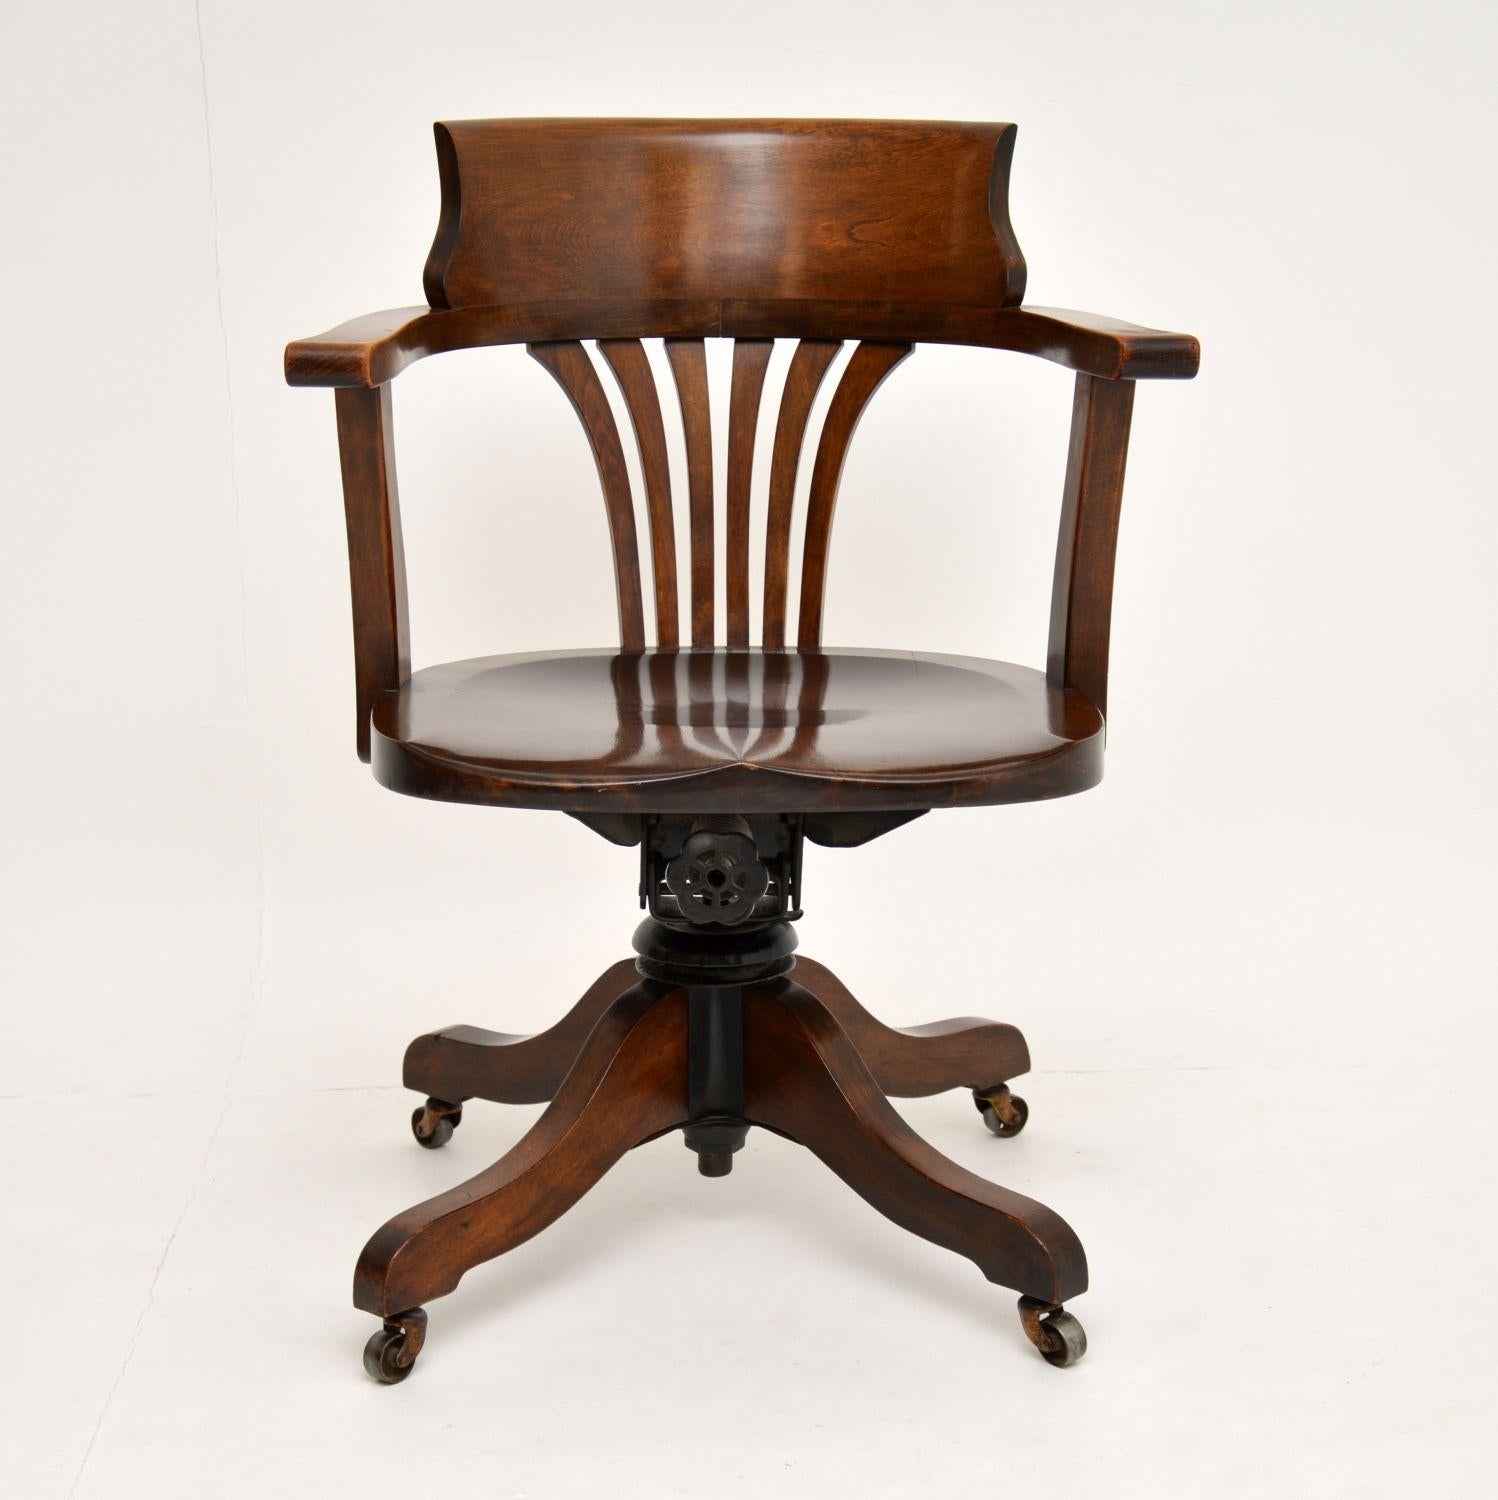 A smart and extremely well made antique swivel desk chair, dating from circa 1890-1900 period.

This is made from solid beech and is in superb original condition with a lovely patina. There is just some very minor surface wear here and there,